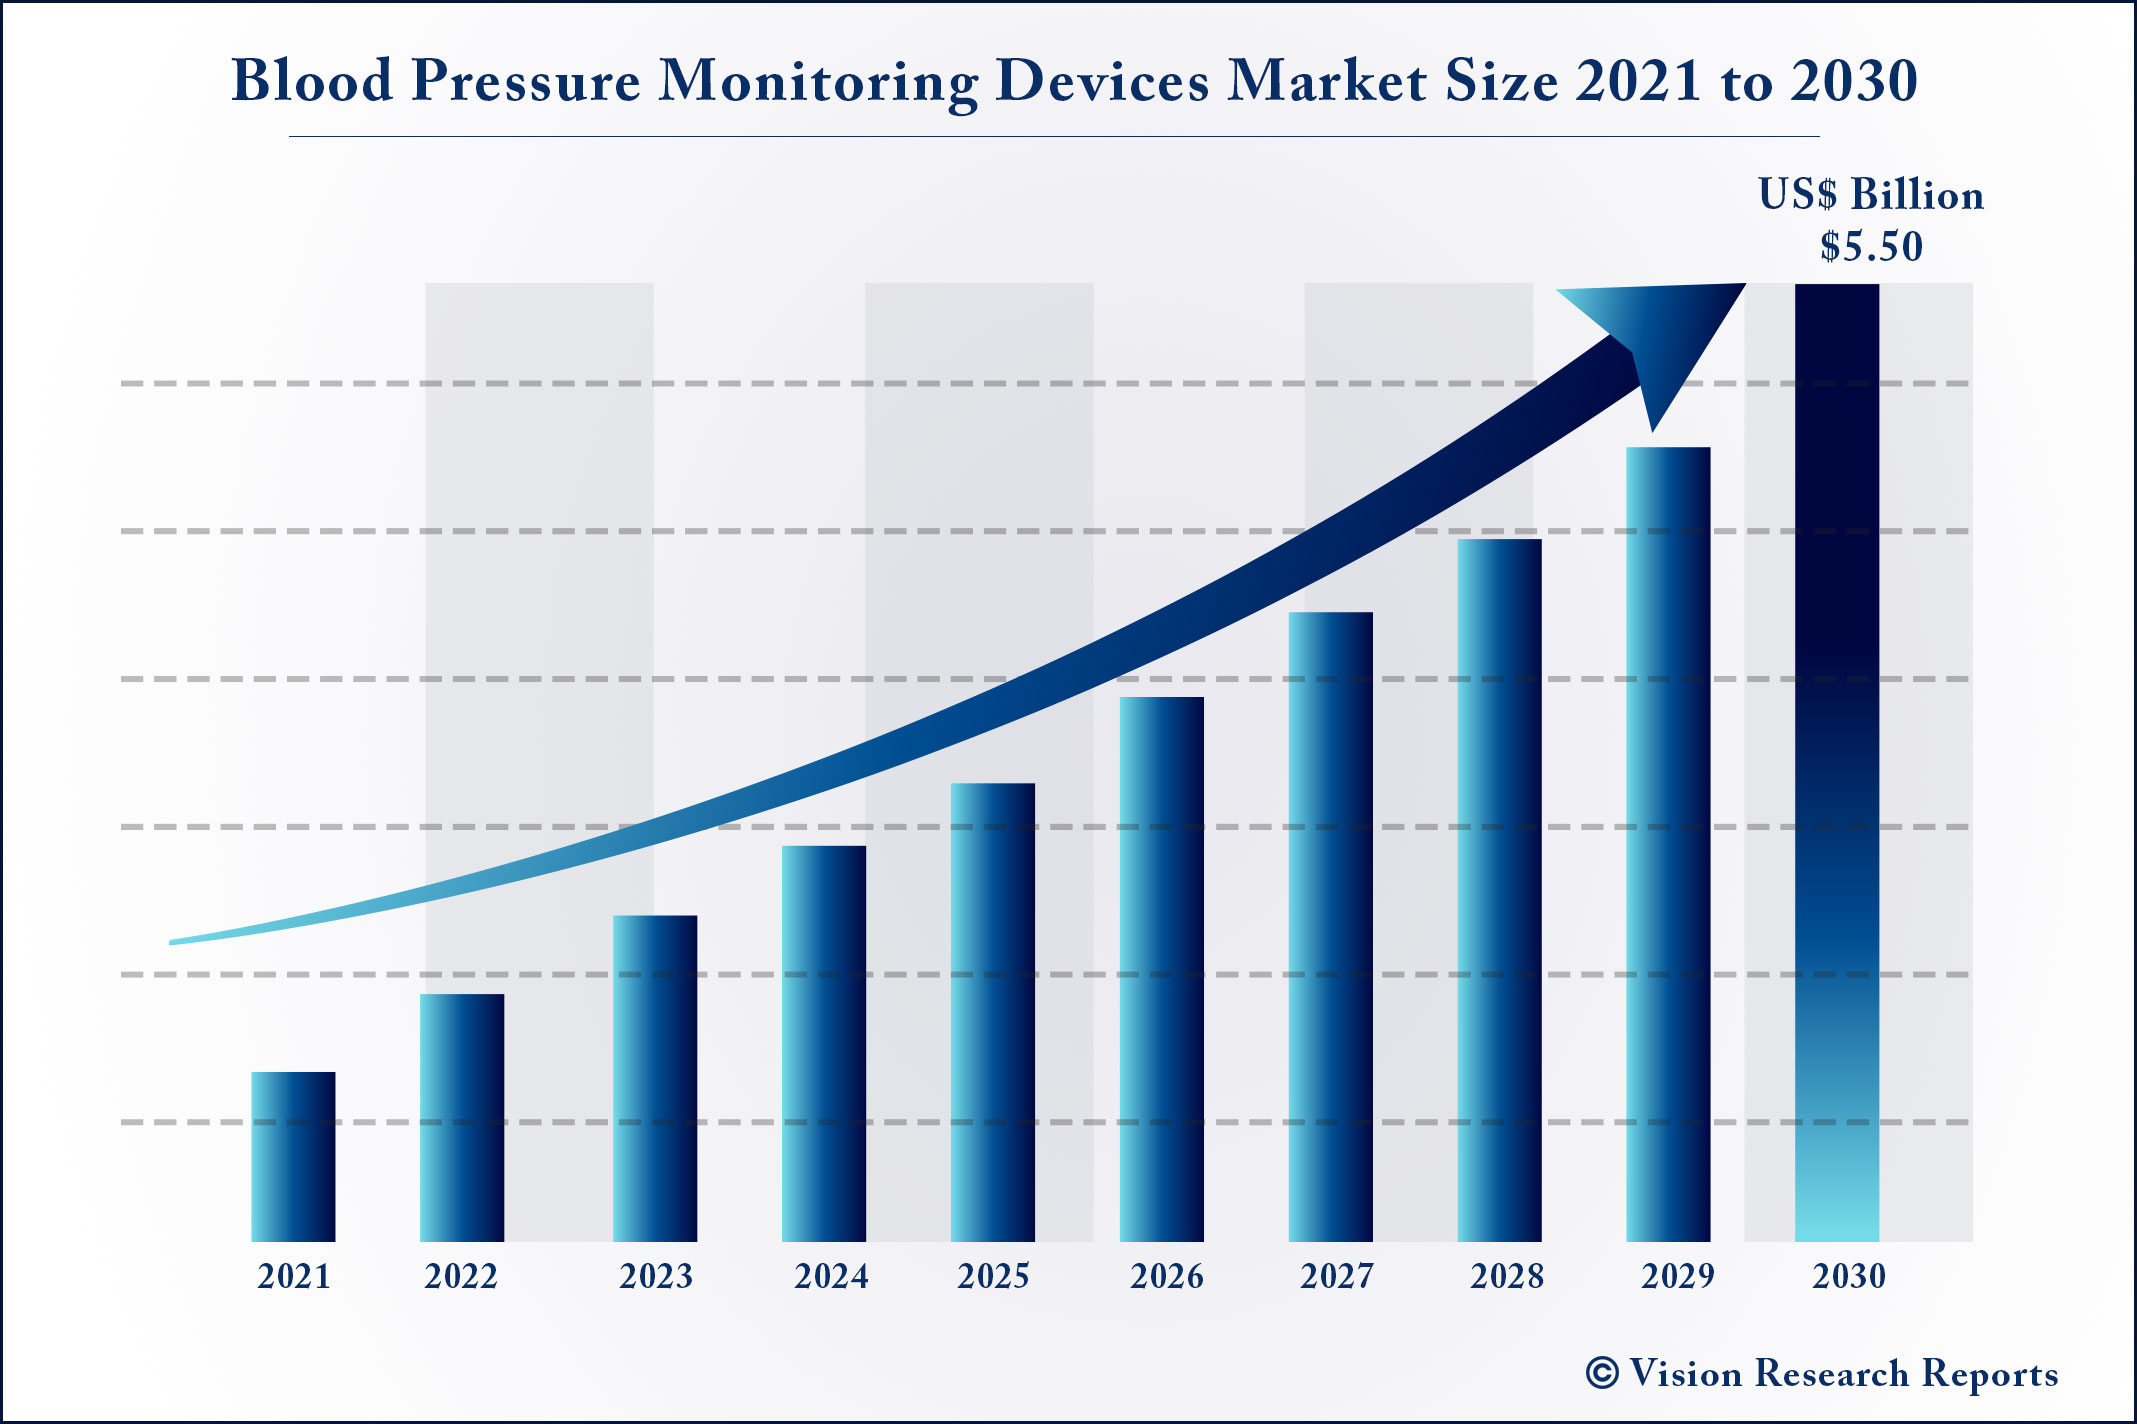 Blood Pressure Monitoring Devices Market Size 2021 to 2030